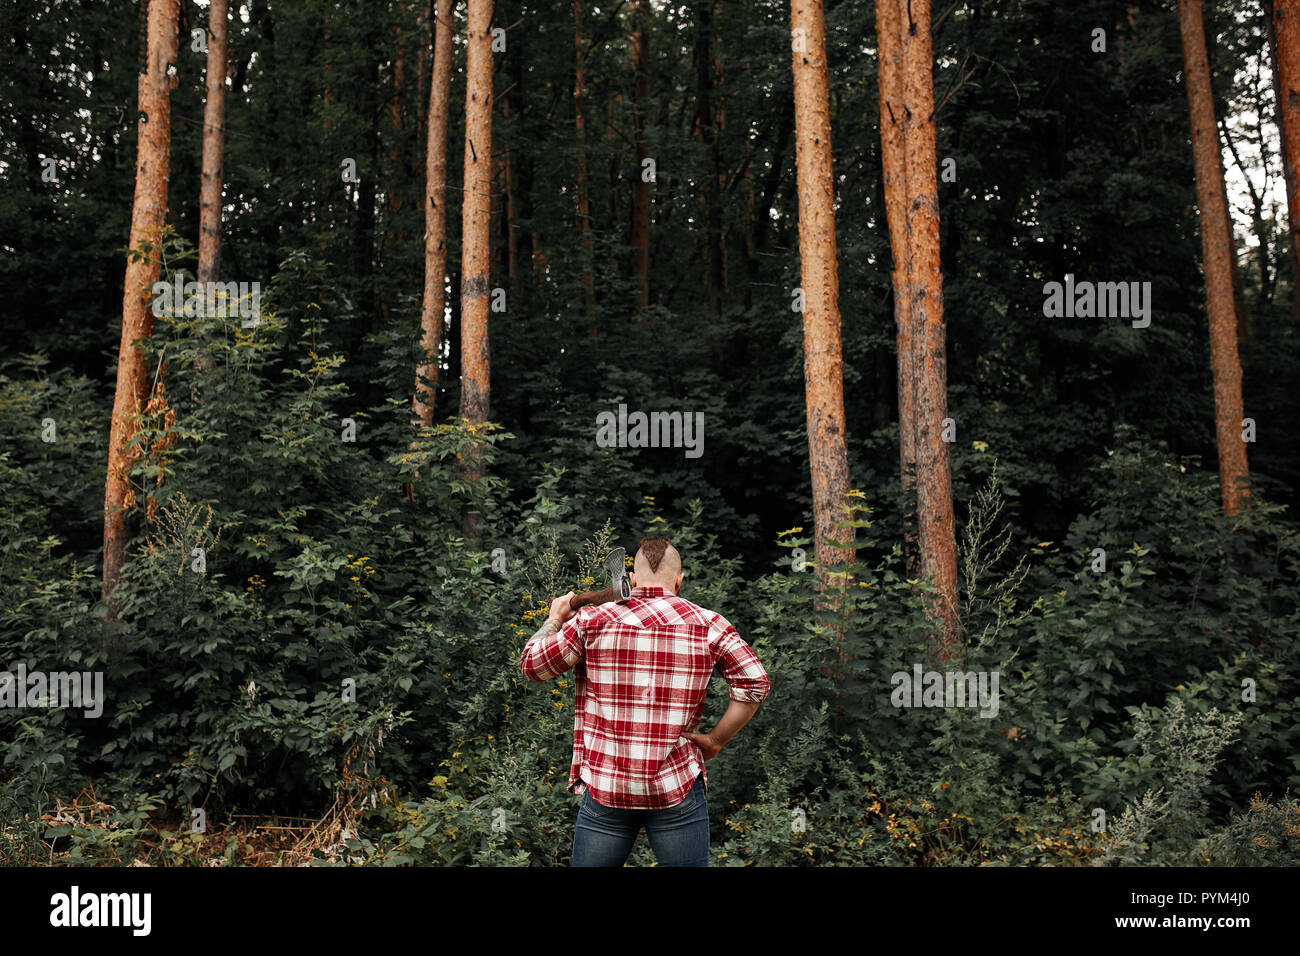 Rear view of lumberjack in forest holding an axe on his shoulder Stock Photo